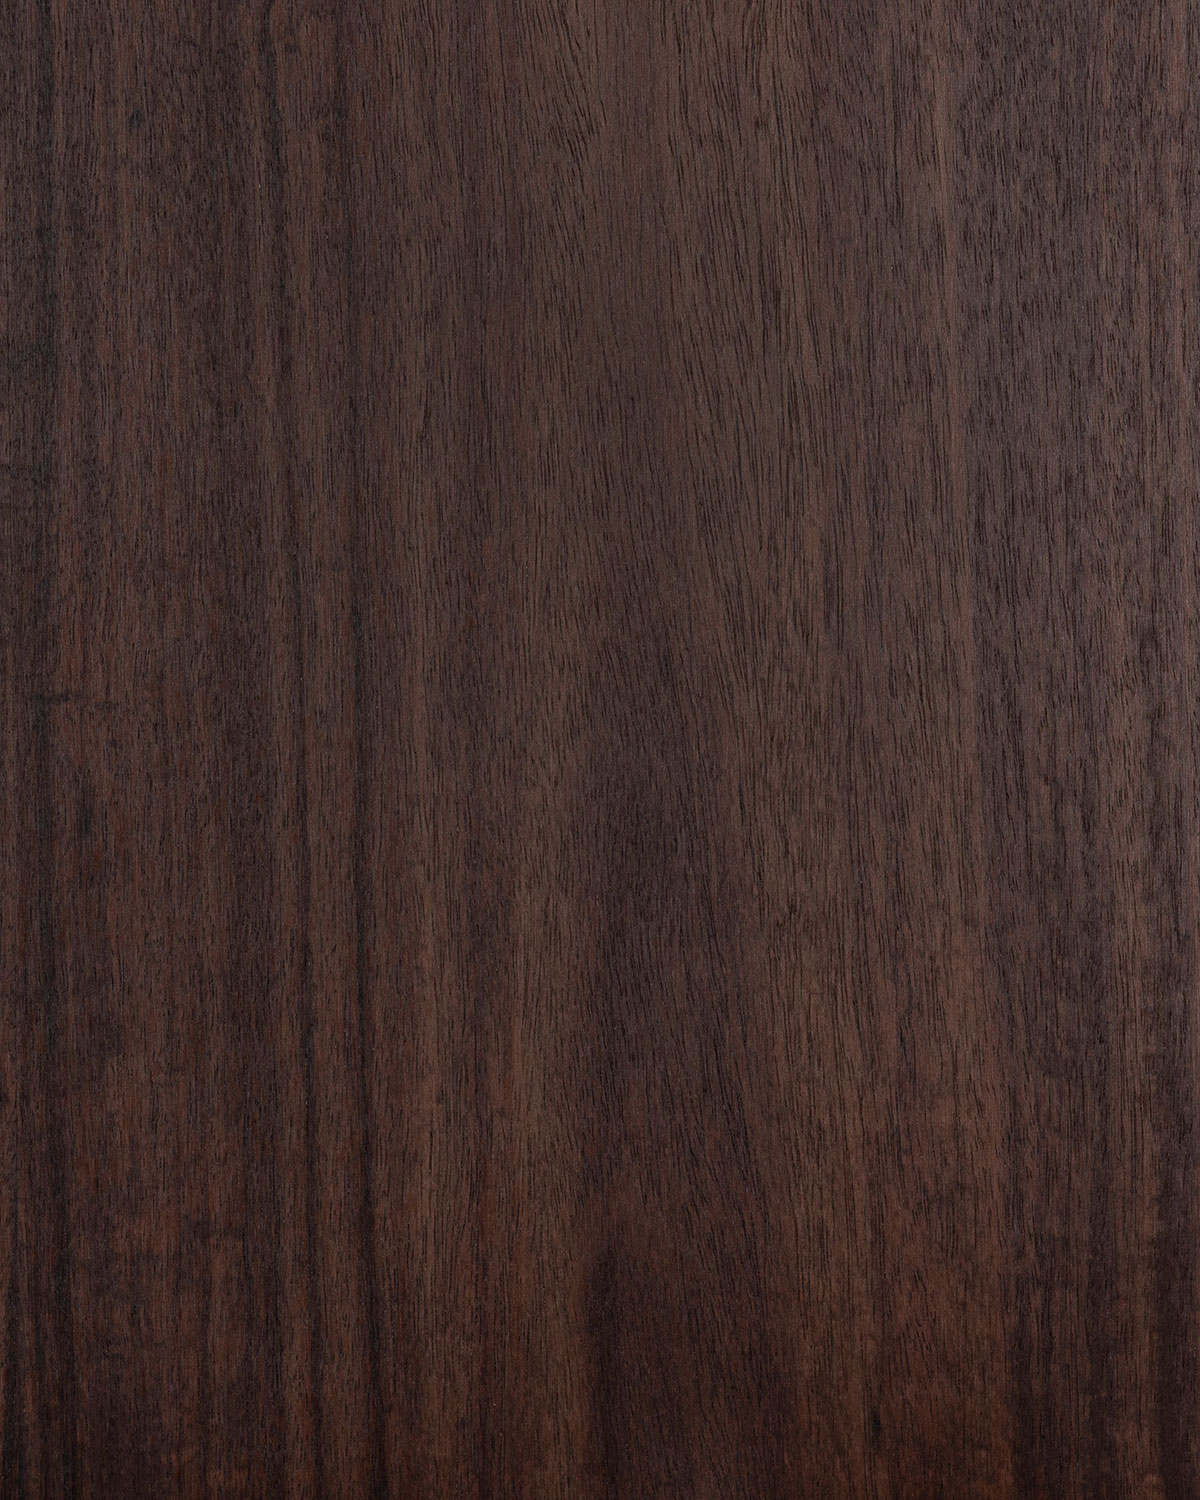 Rosewood, Mexican Flat Cut - Dark Stain